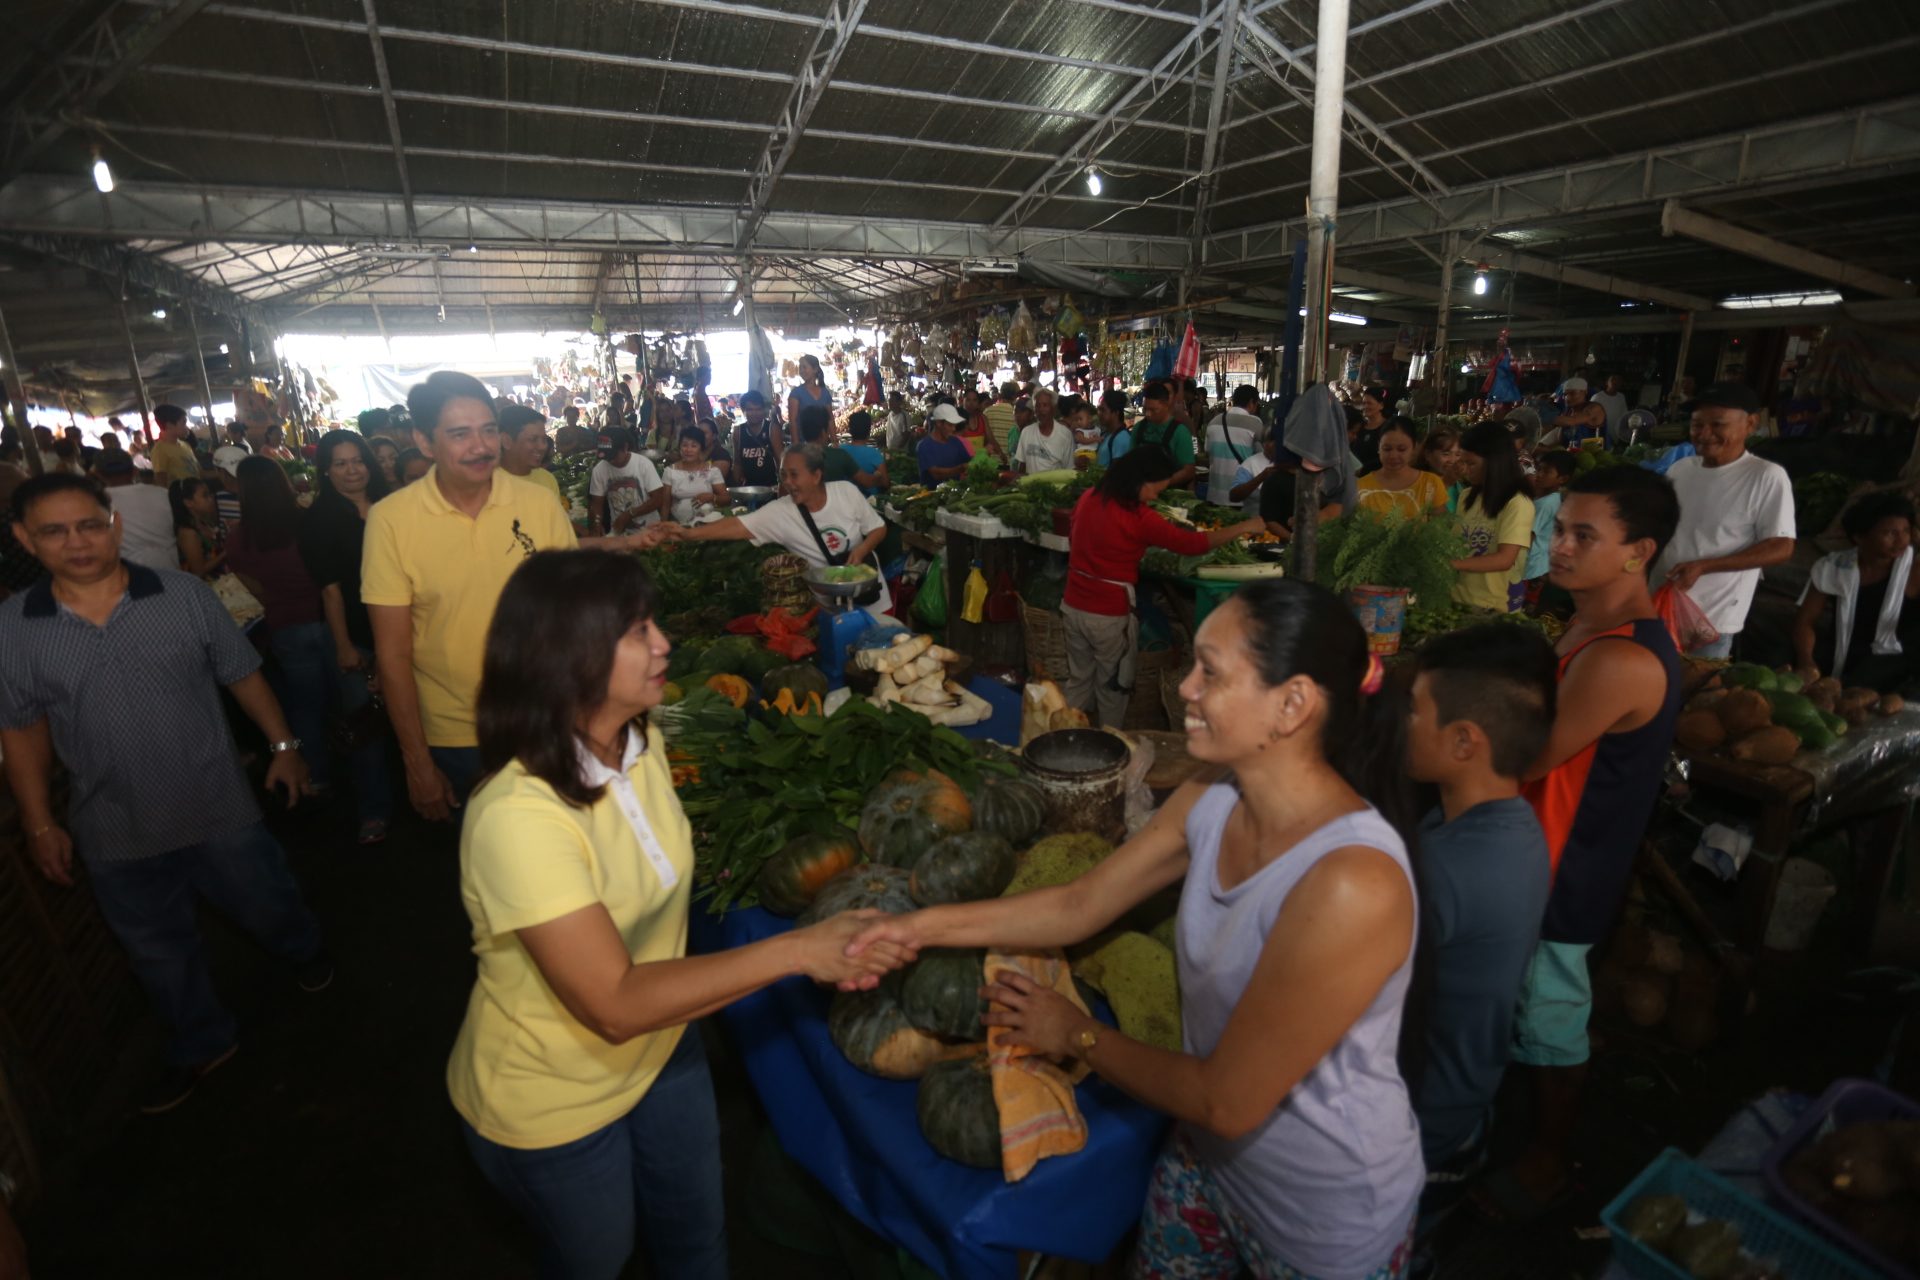 PERSONAL TOUCH. LP vice presidential candidate Leni Robredo will go the same route as in 2013: making personal visits to woo voters. Photo by Leni Robredo Media Bureau 